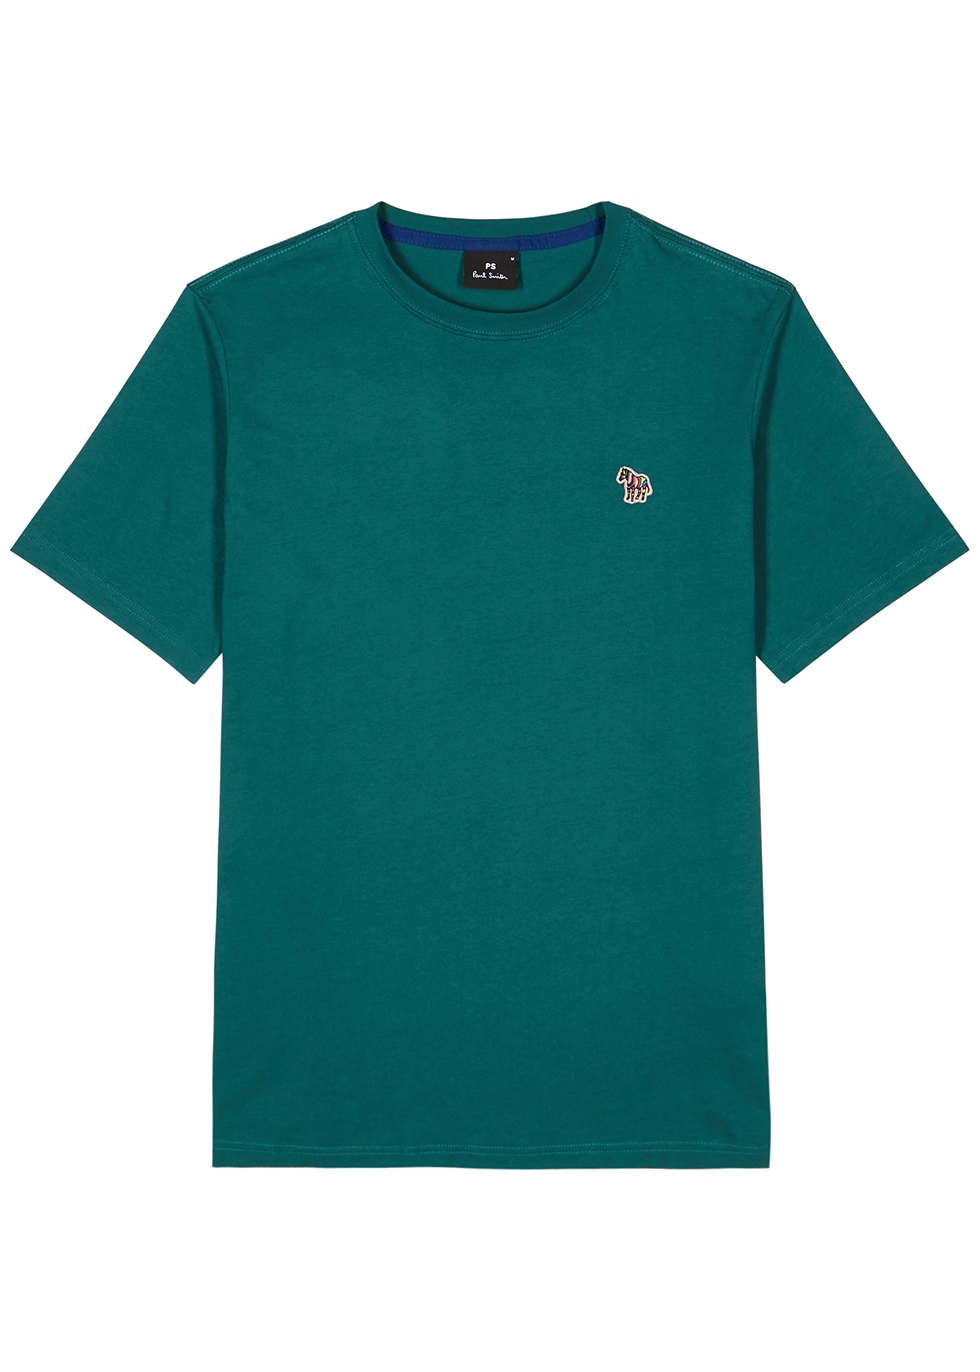 PS by Paul Smith Teal cotton T-shirt 